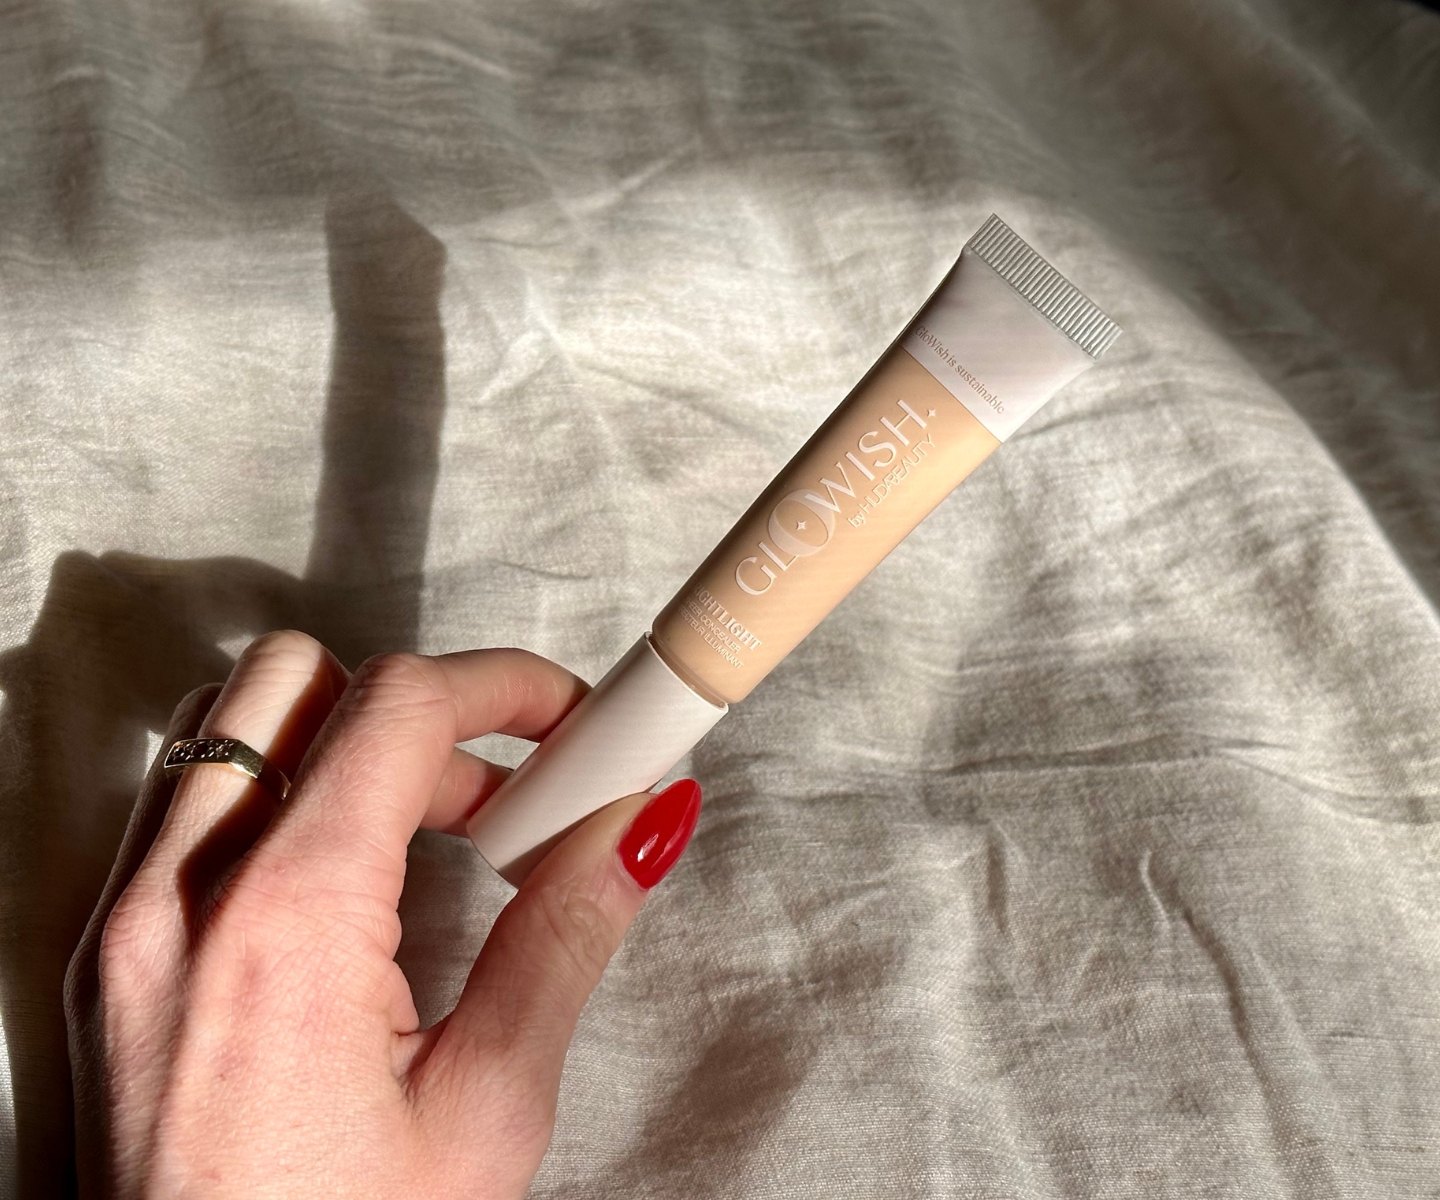 Glowish concealer in-article pic